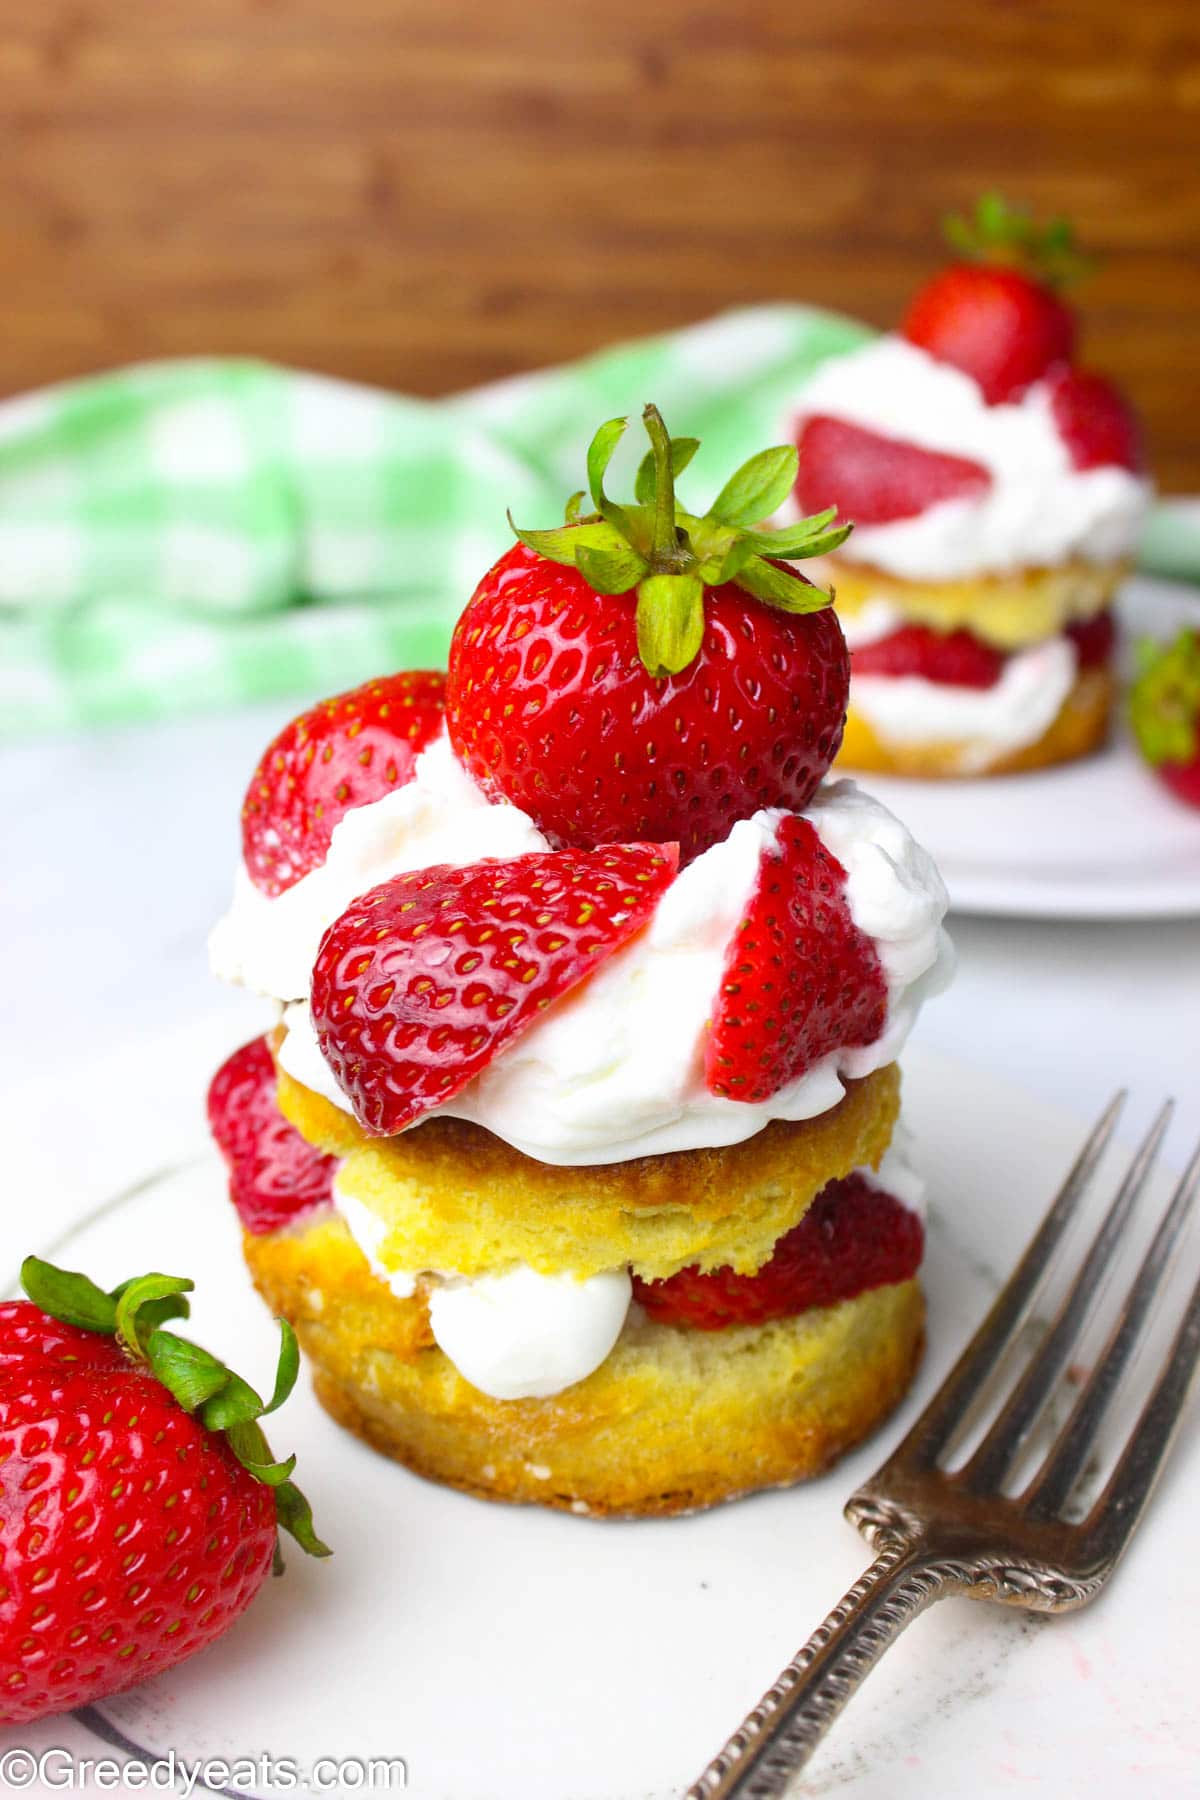 A layered shortcake biscuit with two layers of whipped cream topping and strawberries on a white plate.